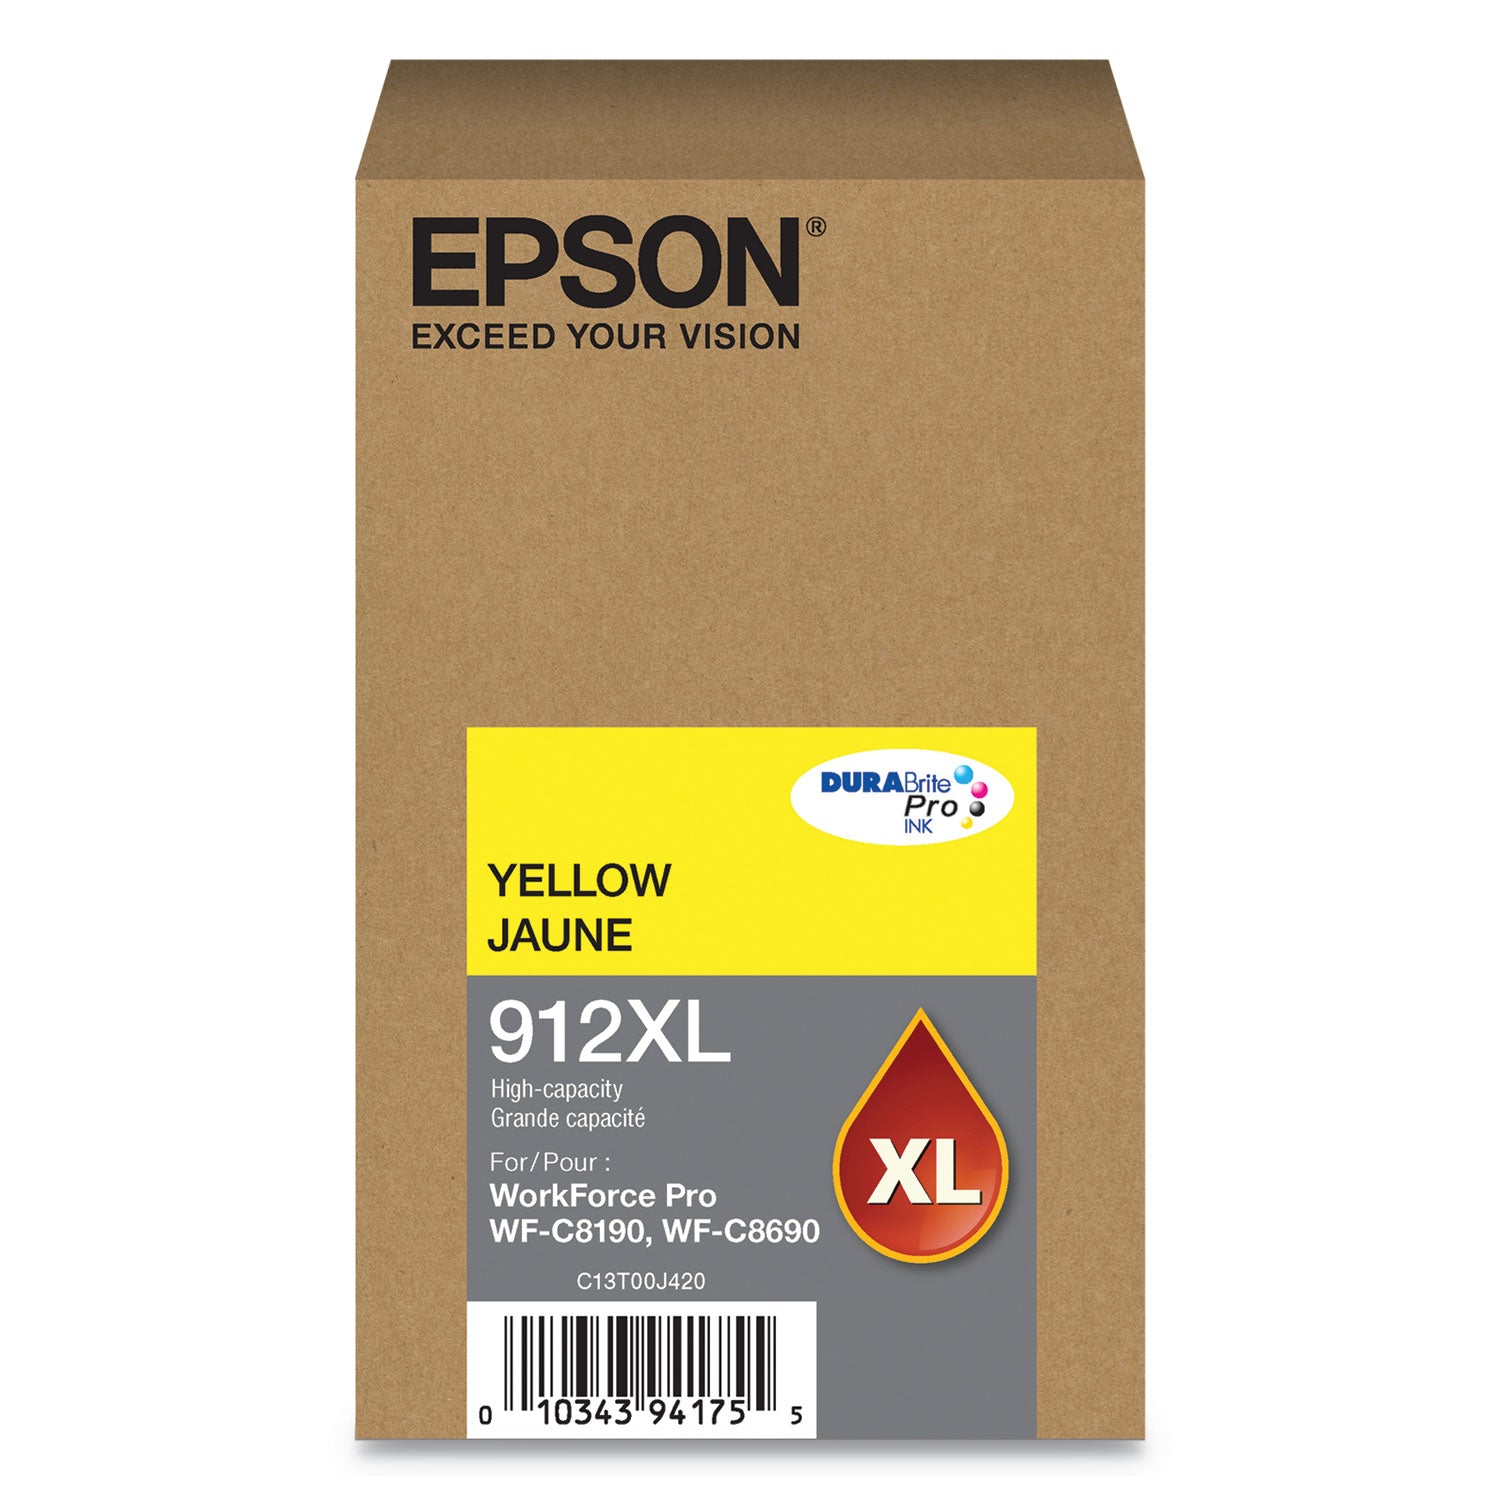 t912xl420-912xl-durabrite-pro-high-yield-ink-4600-page-yield-yellow_epst912xl420 - 1